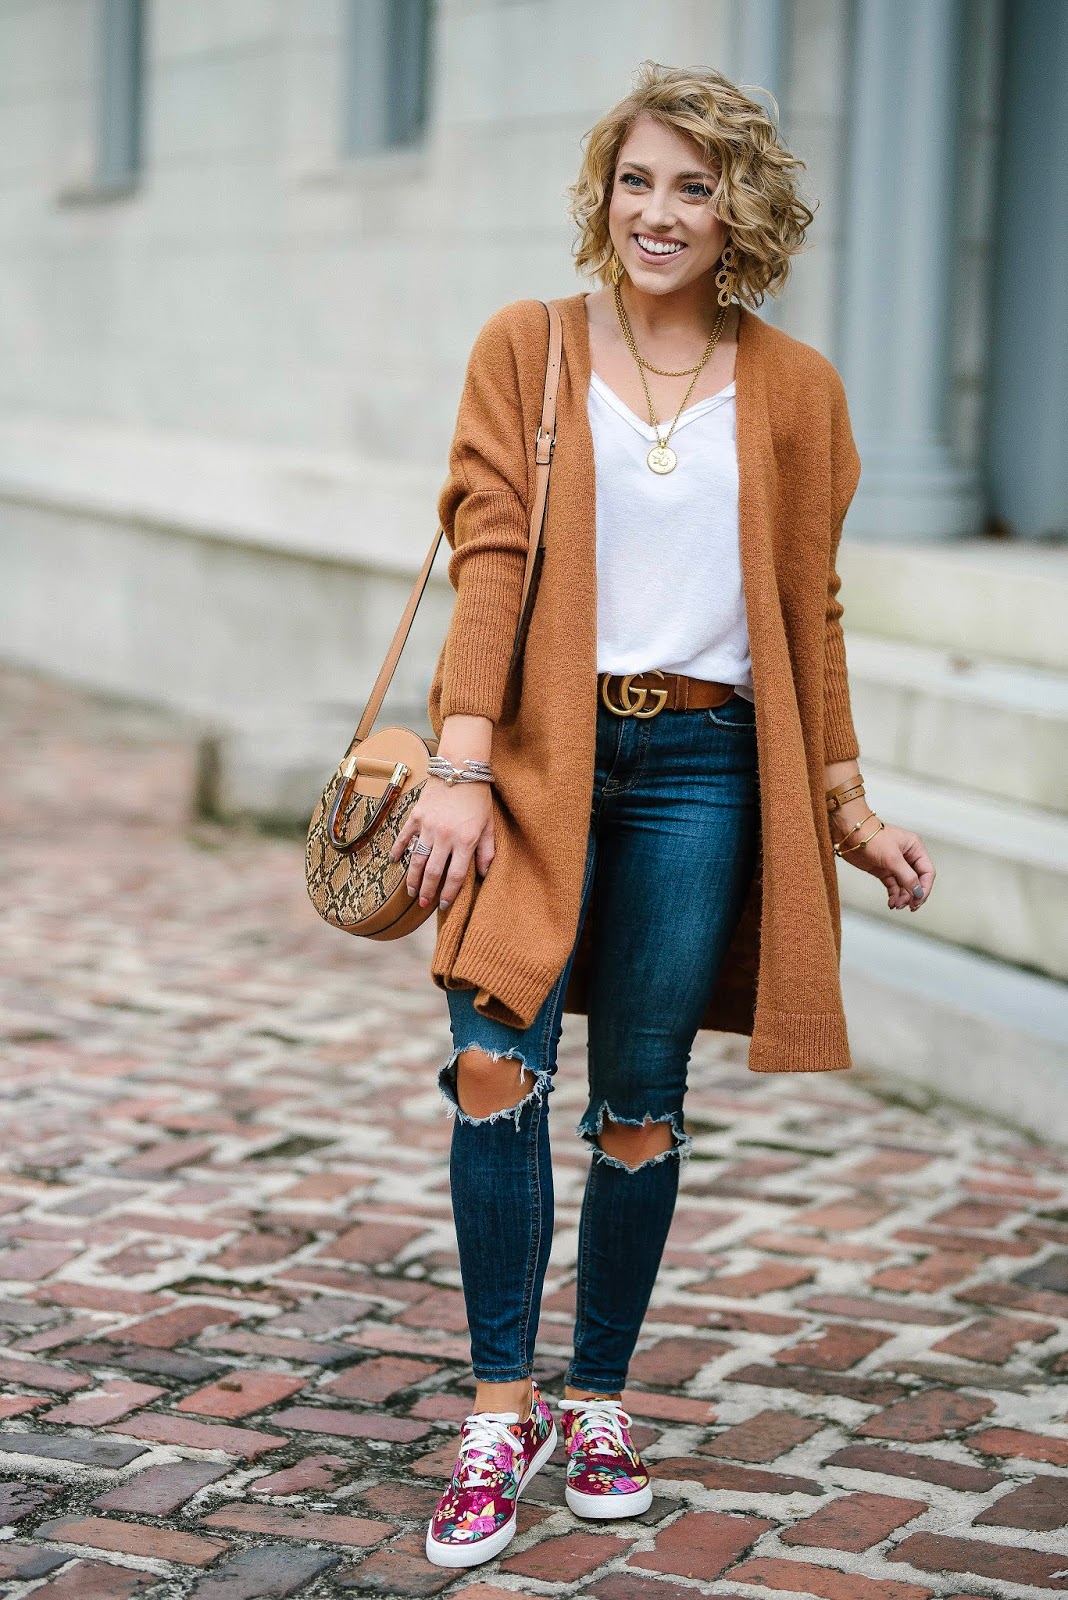 Fall Fashion: $51 Brown Cardigan, Free People Jeans and  Keds x Rifle Paper Co. Sneakers - Something Delightful Blog